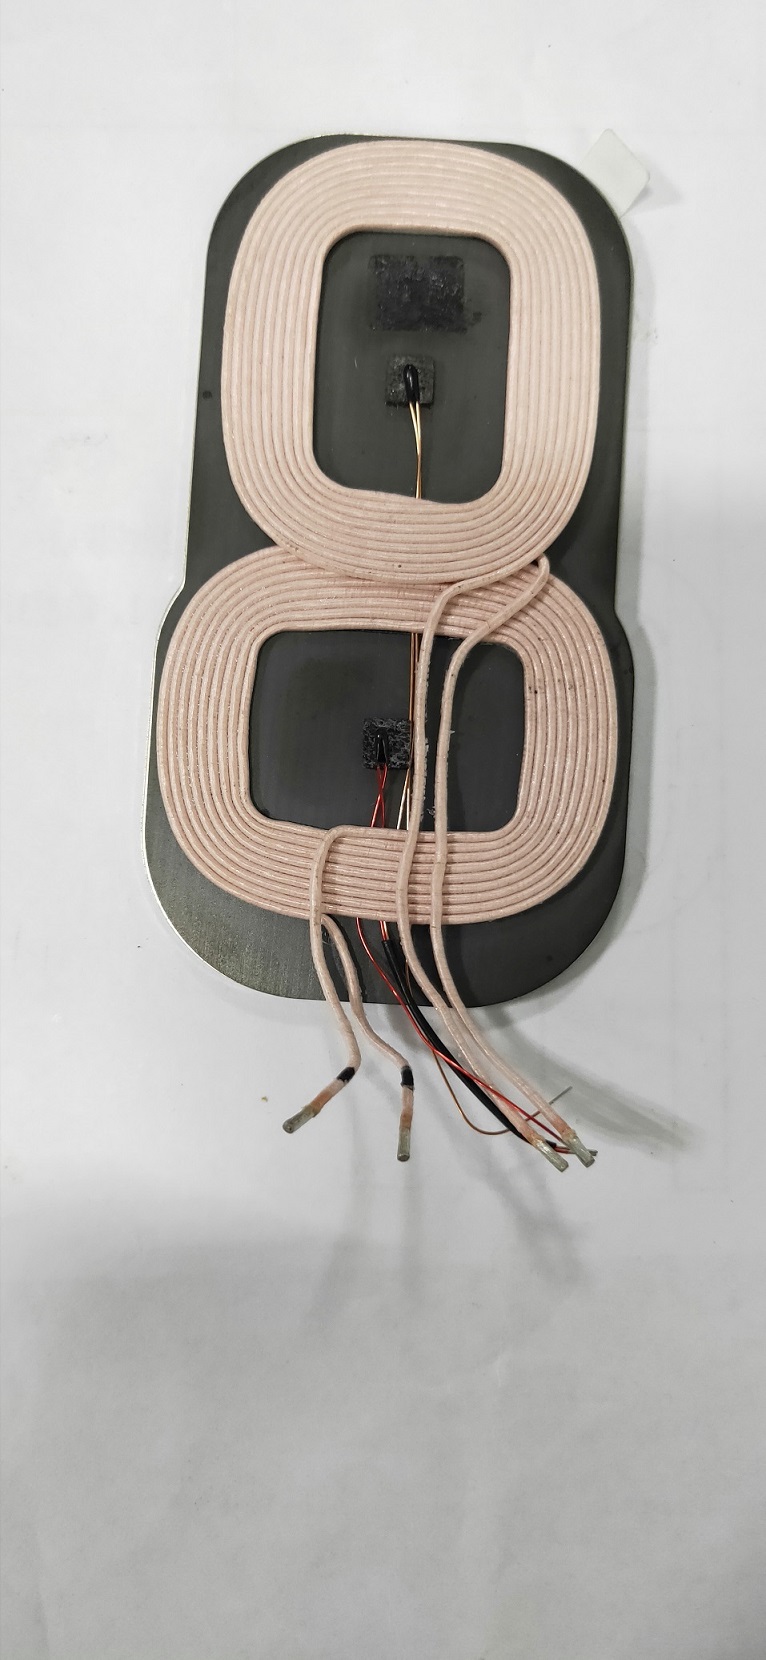 Wireless charging coil